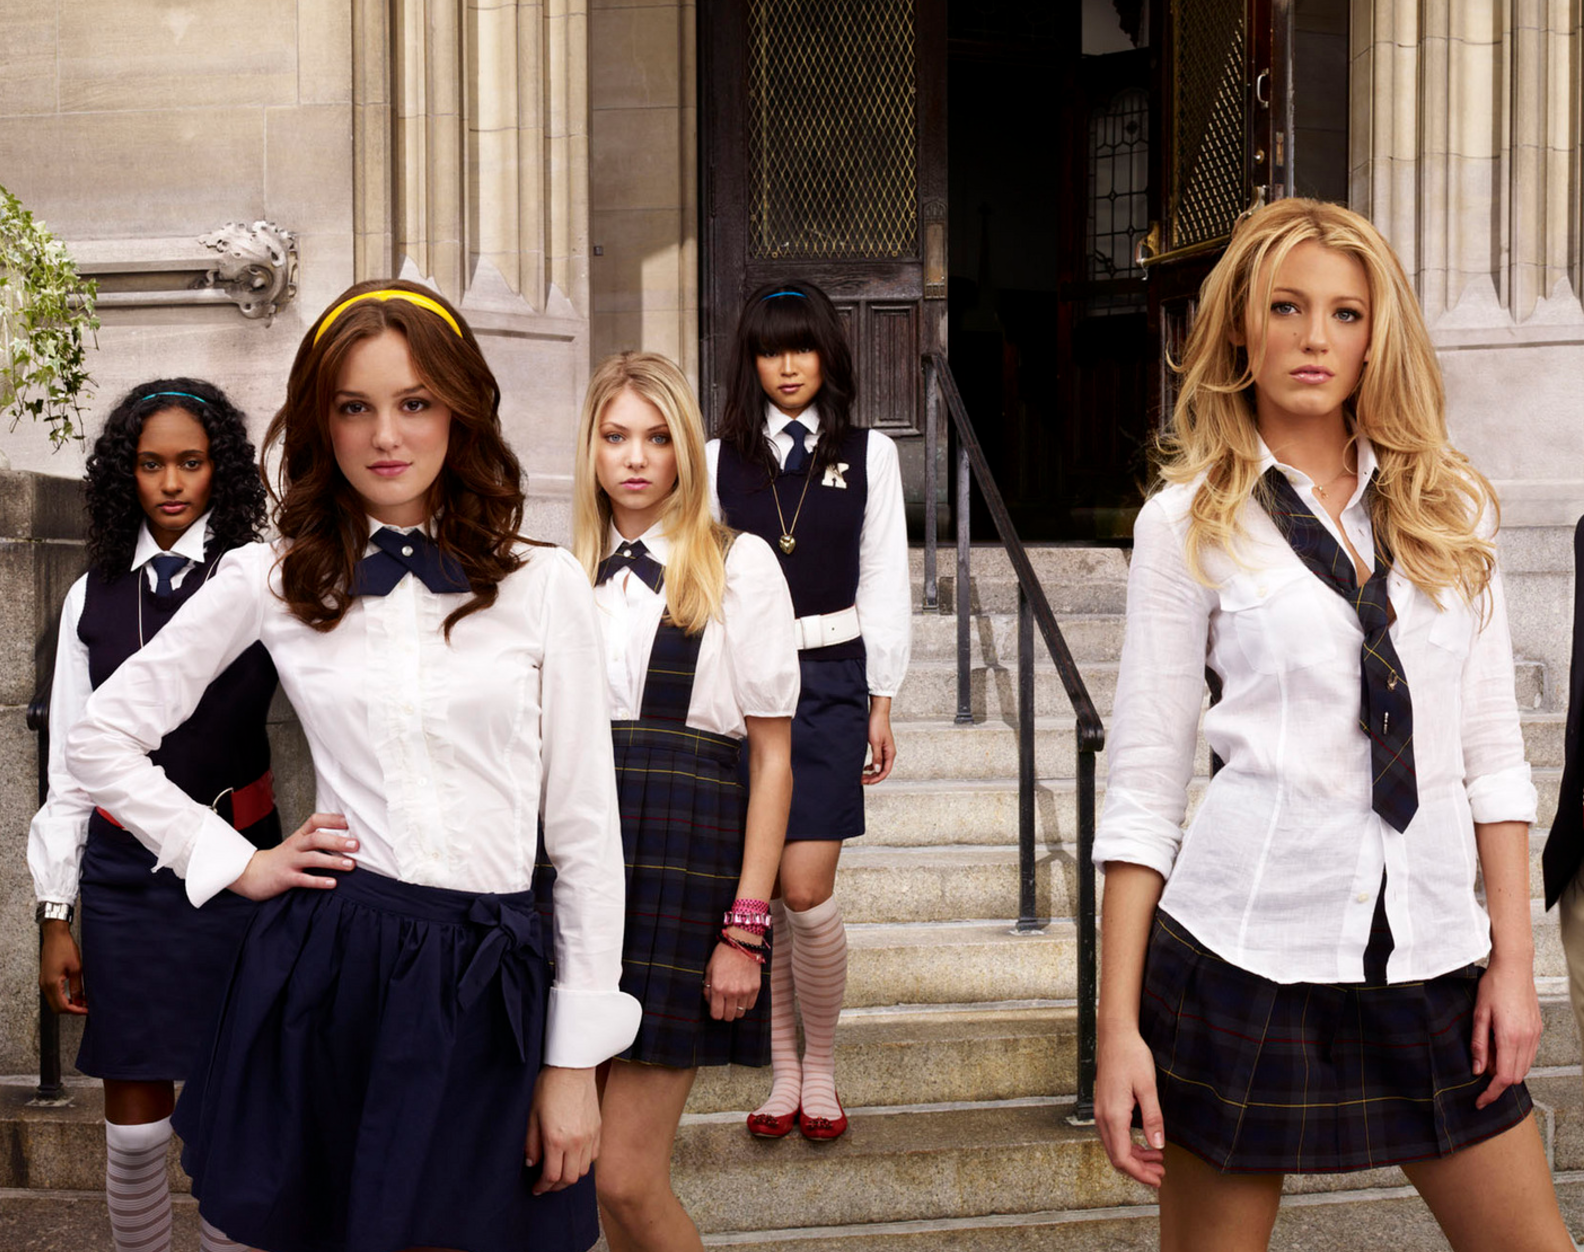 Things 'Gossip Girl' Probably Influenced You To Buy